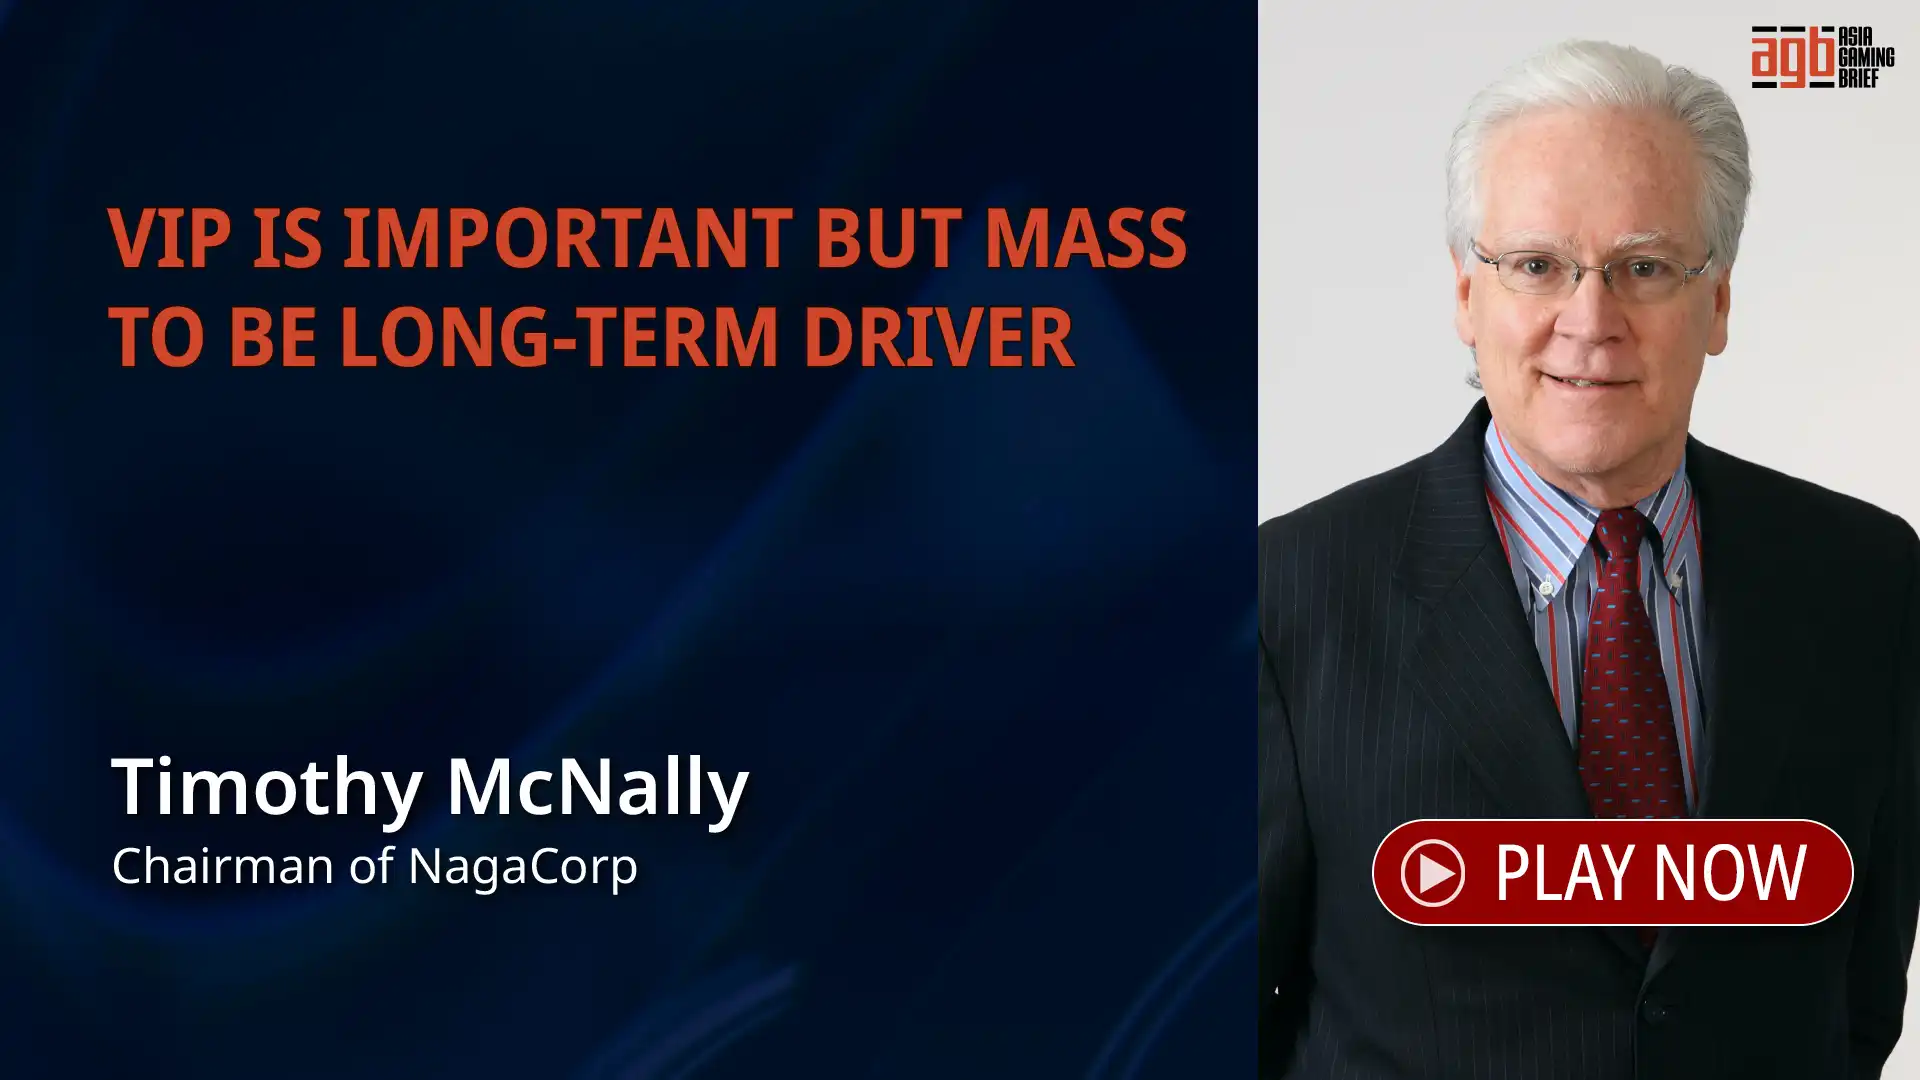 VIP is important but mass to be the long-term growth driver, Timothy McNally, NagaCorp